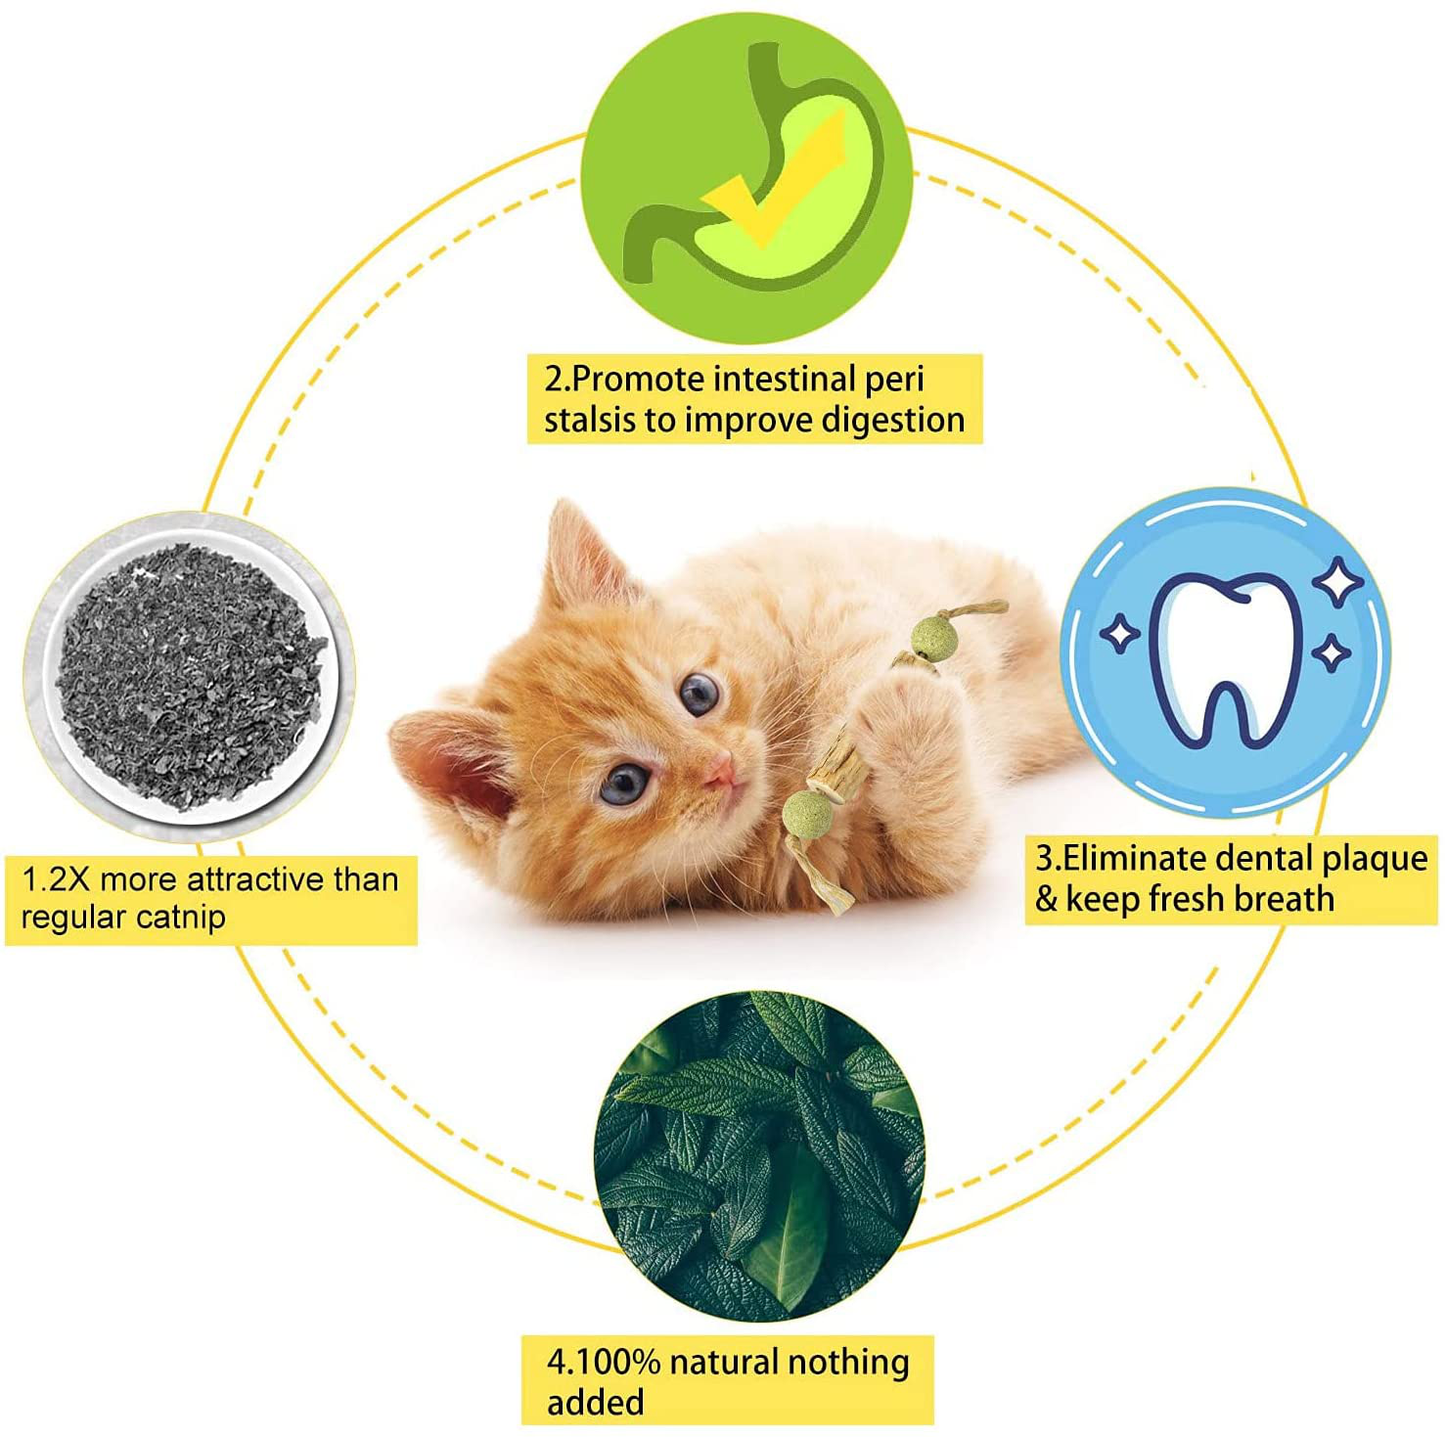 Catnip Toy Cat Toy Indoor，Cat Chewing Natural Silvervine Sticks for Cats，Make the Cat Happy Cat Kick Interactive,Teeth Cleaning Edible Natural to Promote Cat'S Appetite，Natural Catnip Mouse Cat Toy